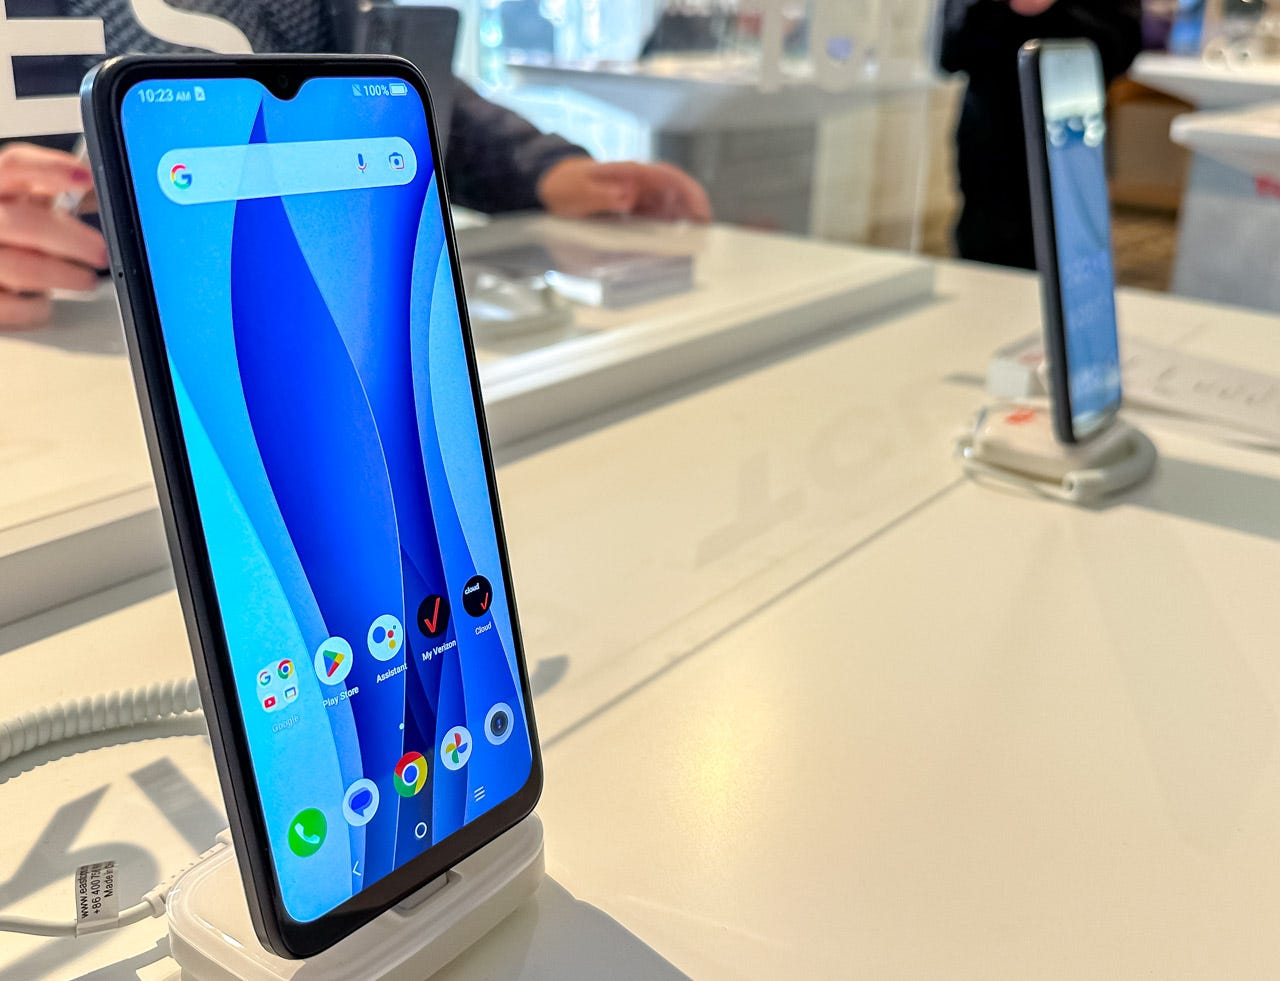 TCL 40 XE 5G hands-on review: the most affordable 5G phone you can buy